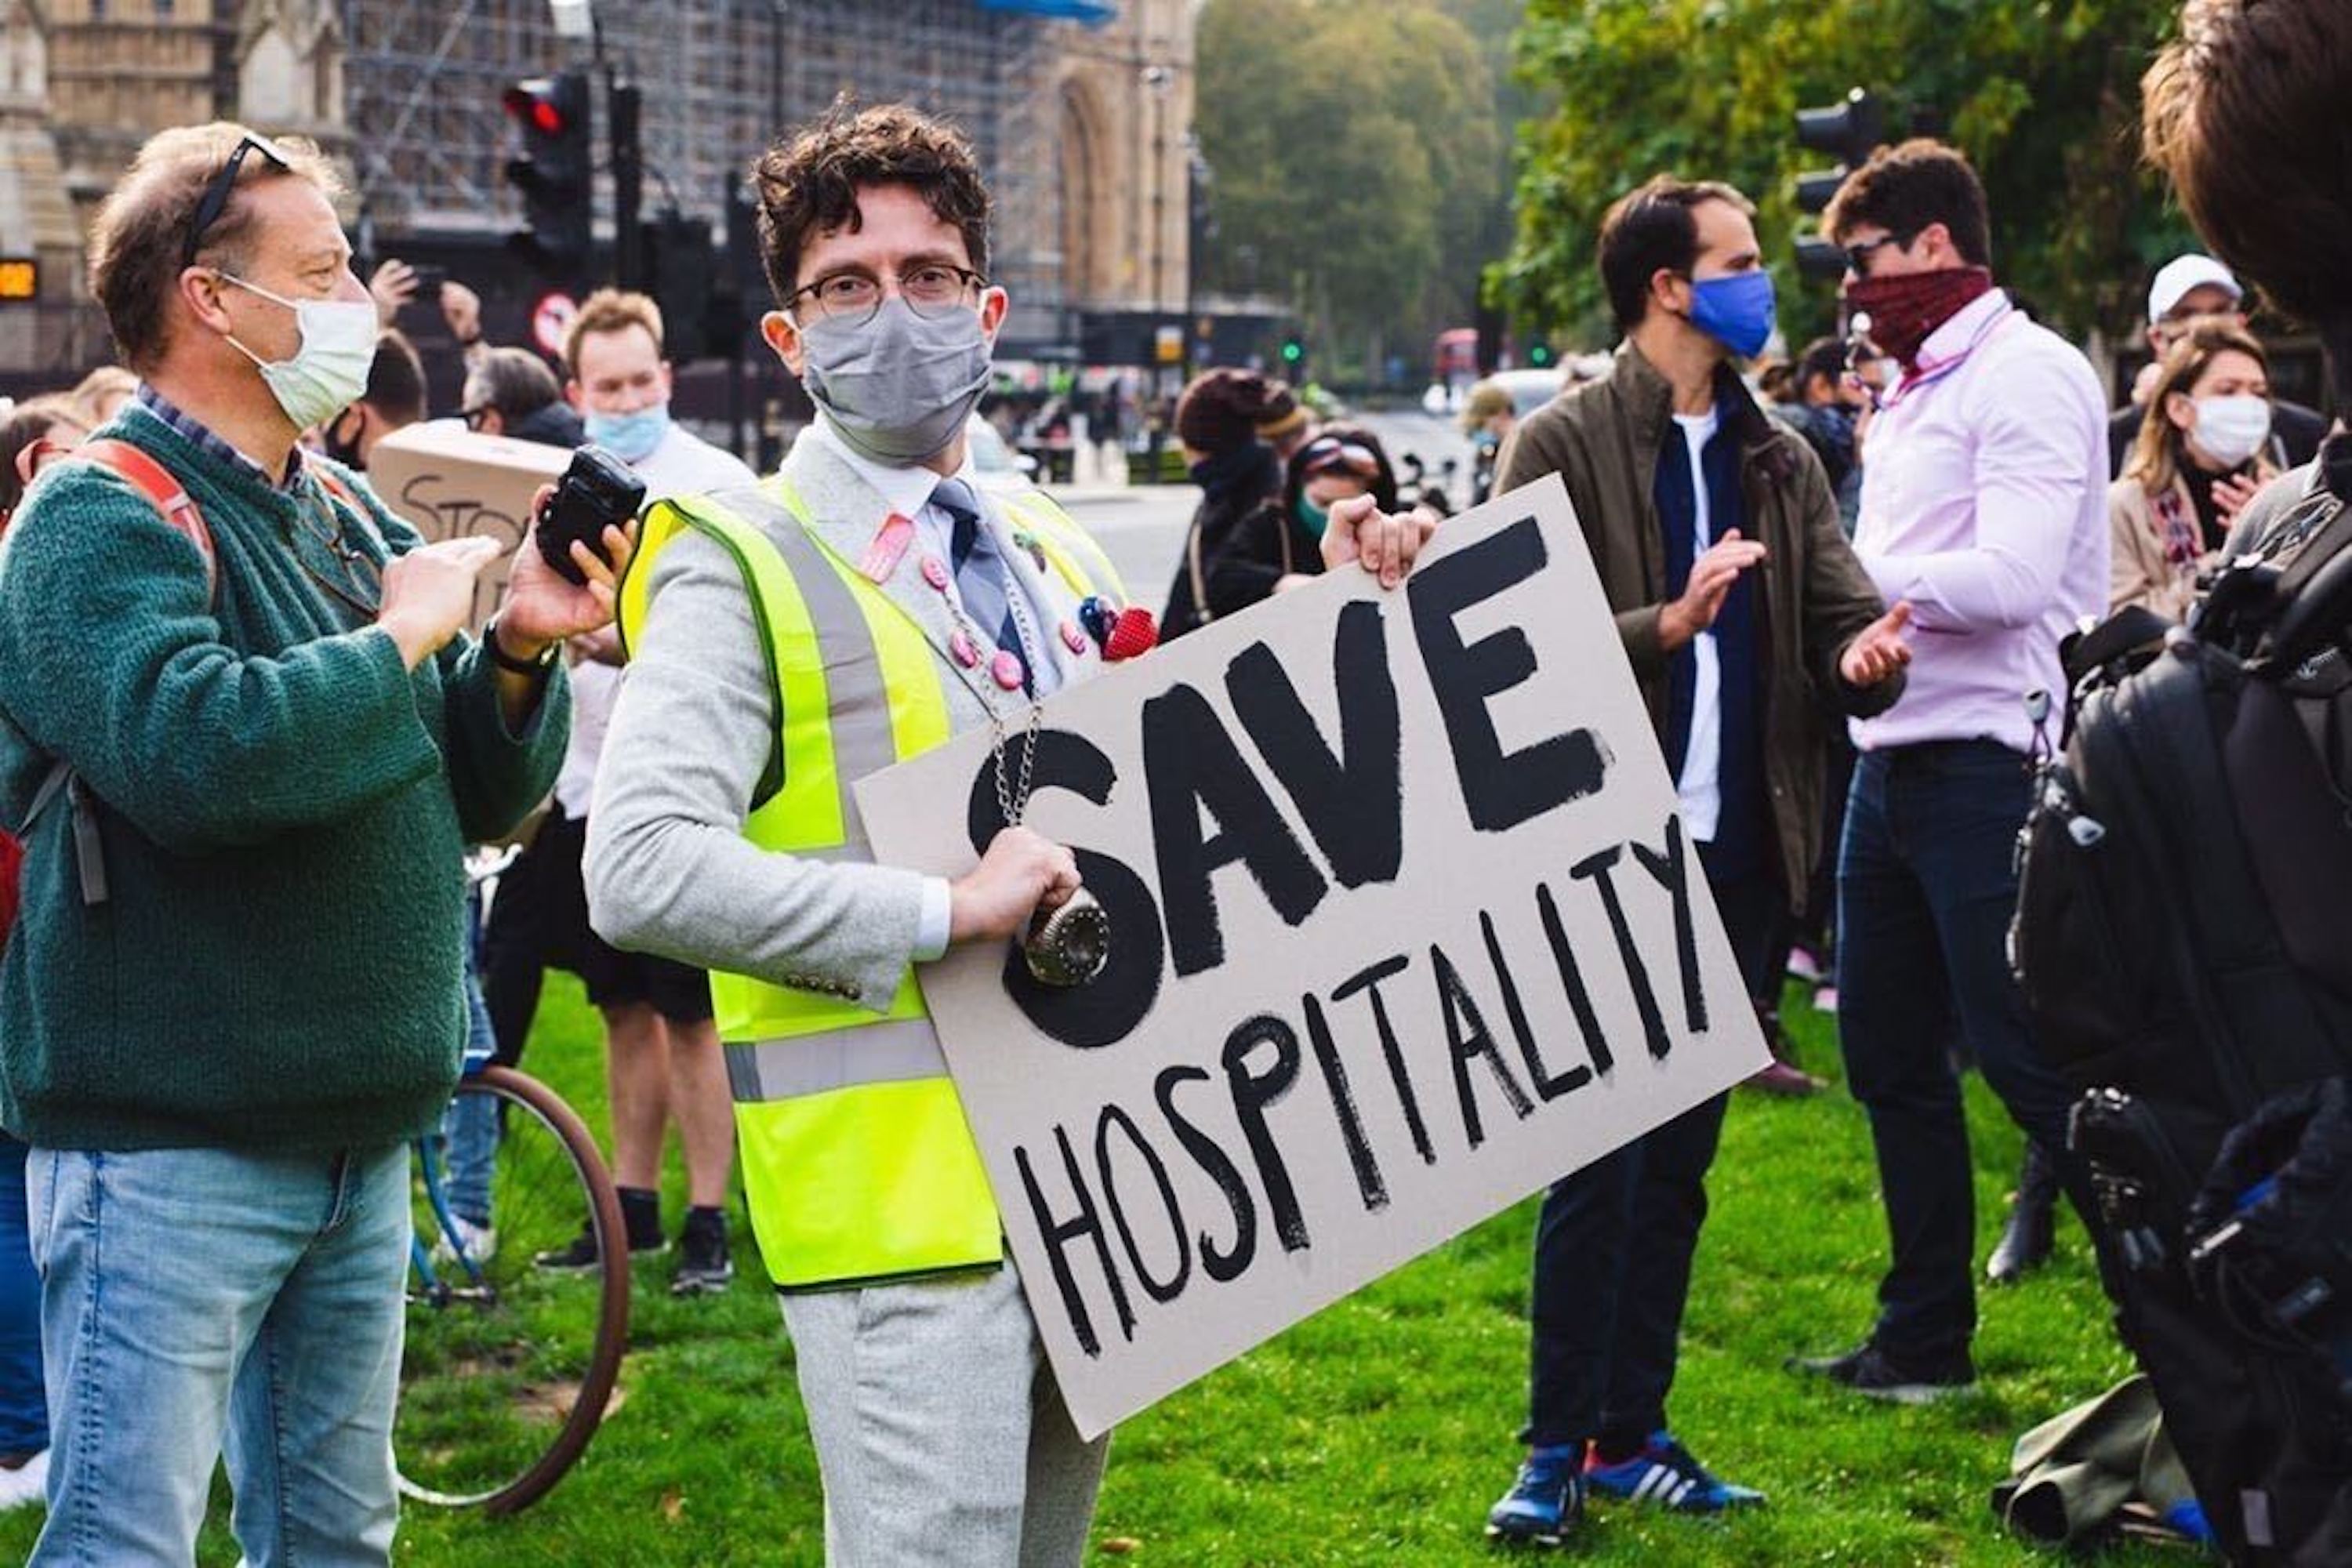 A protester wearing a mask and a hi-vis jacket holds up a placard that reads “save hospitality,” in capital letters, at Parliament Square in London. He is surrounded by fellow protesters, also in masks